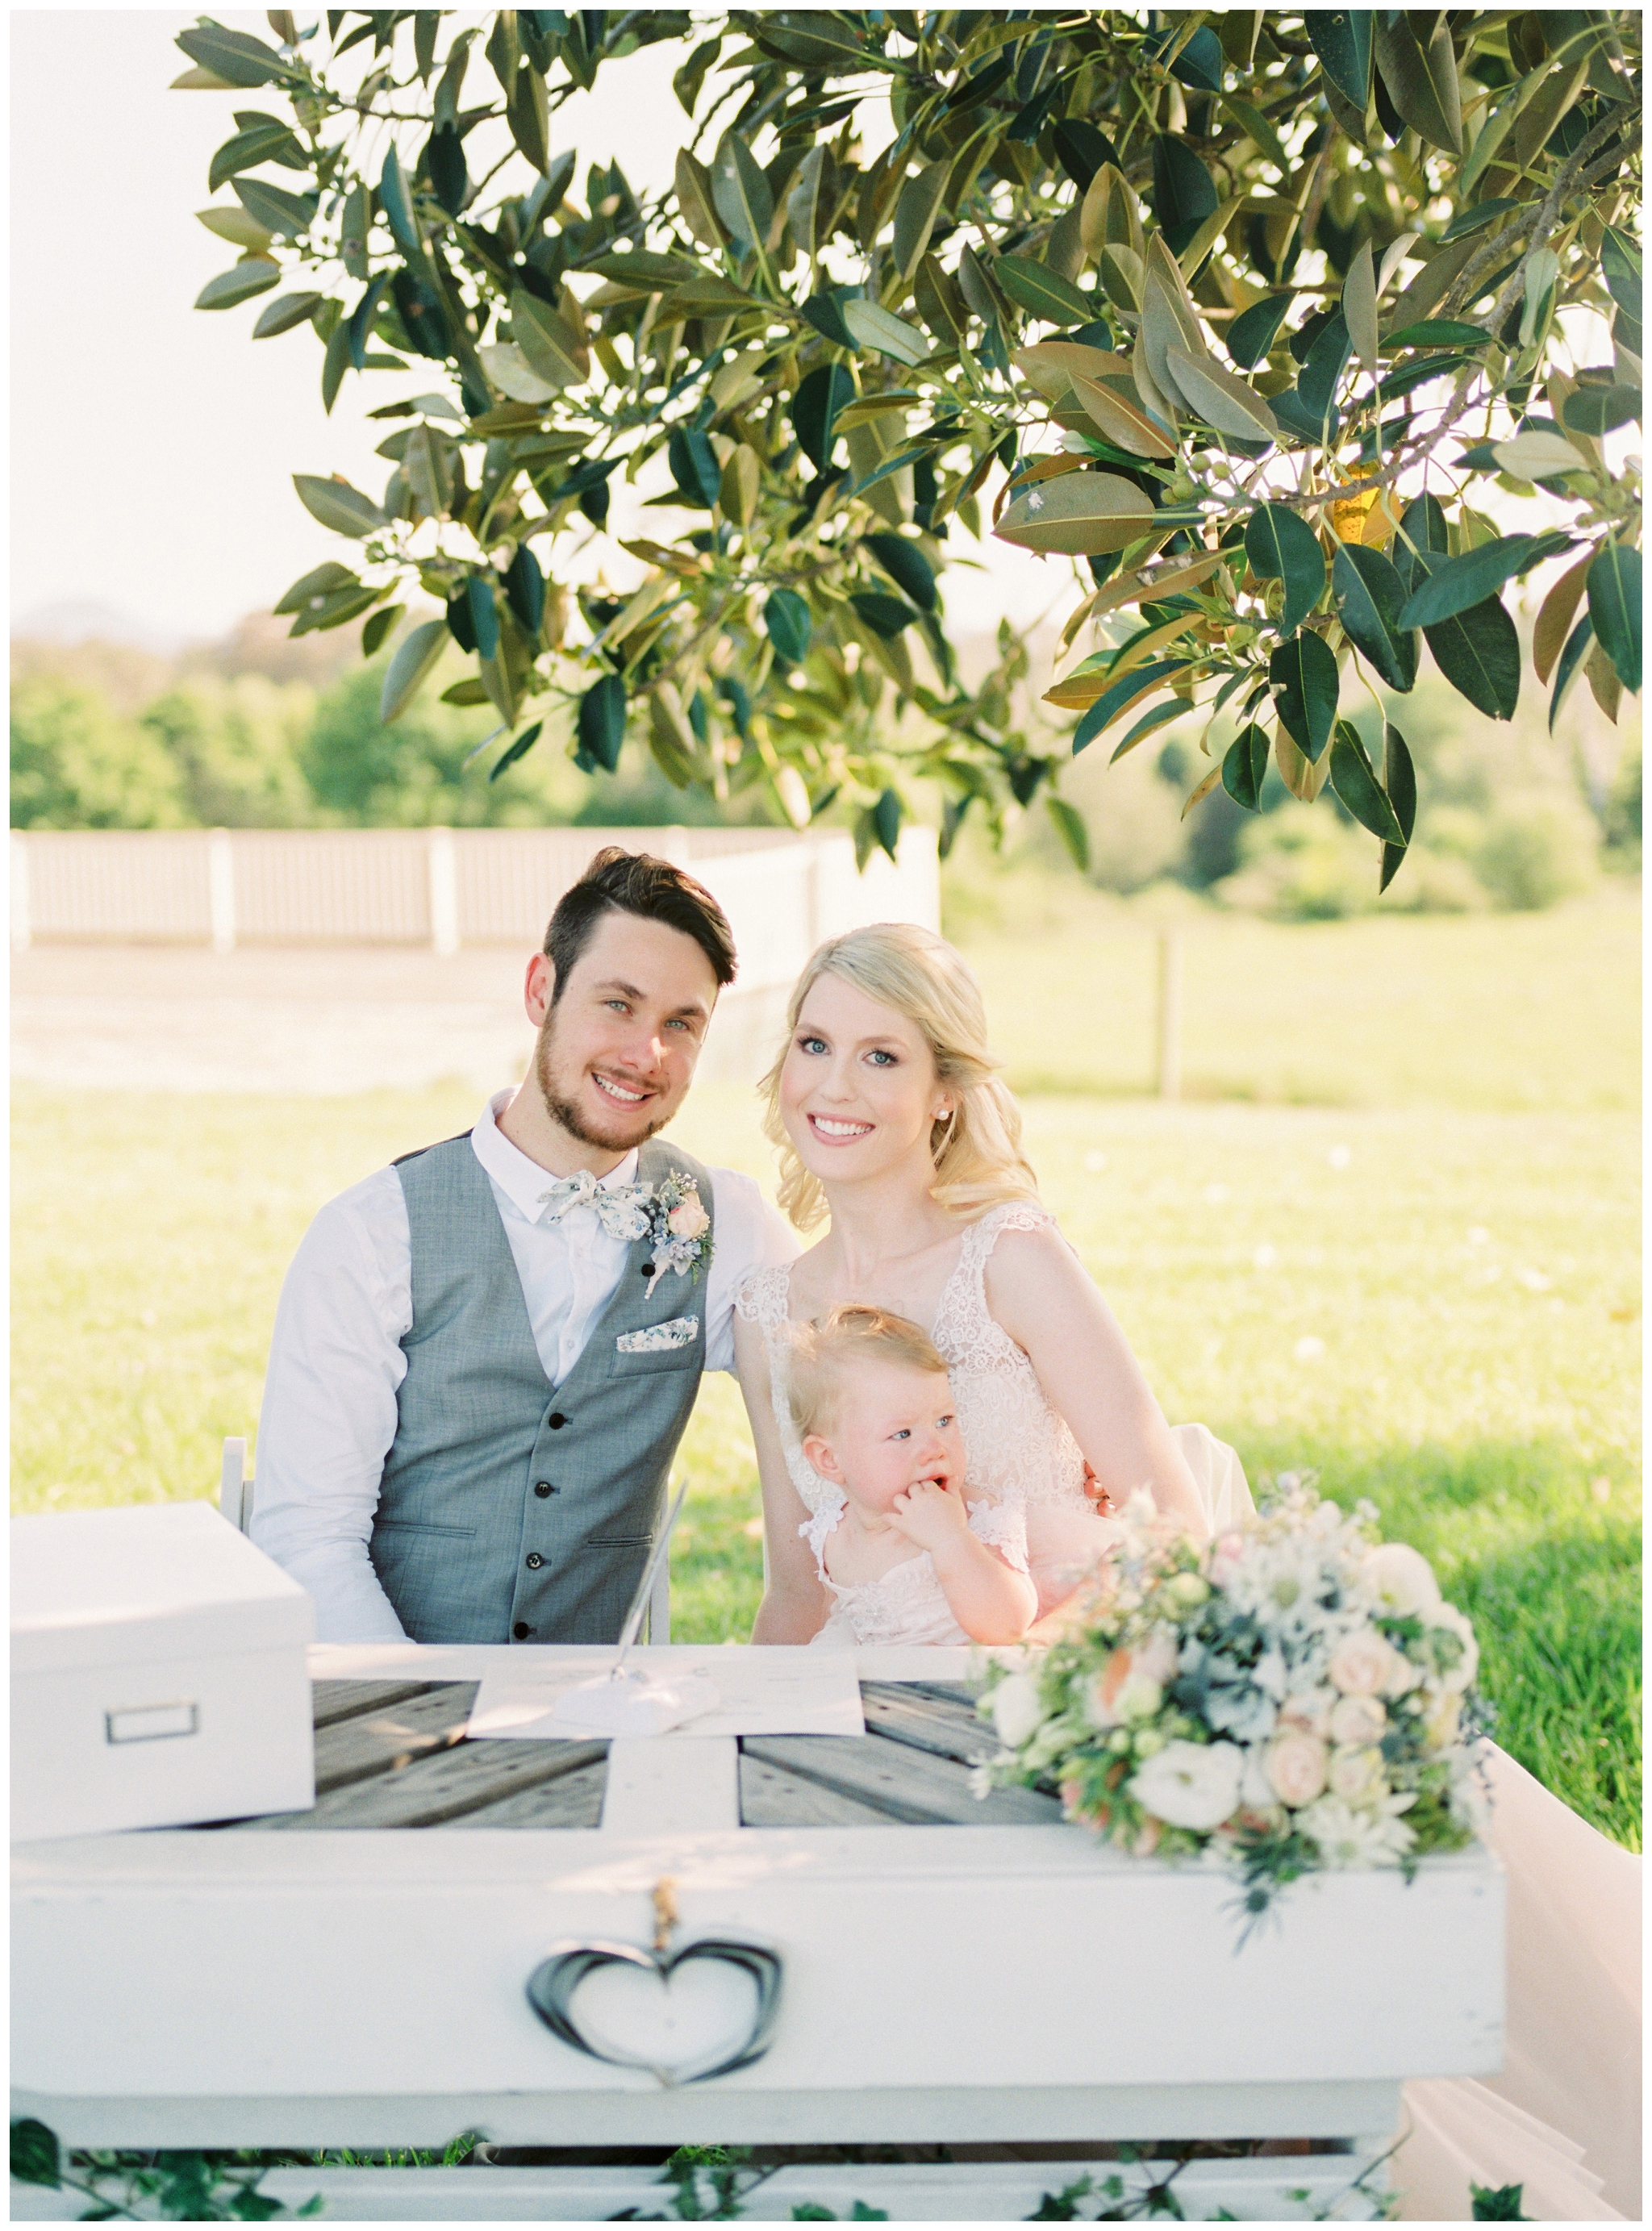 Tegan and Alex Wedding at Albert River Wines by Casey Jane Photography 43